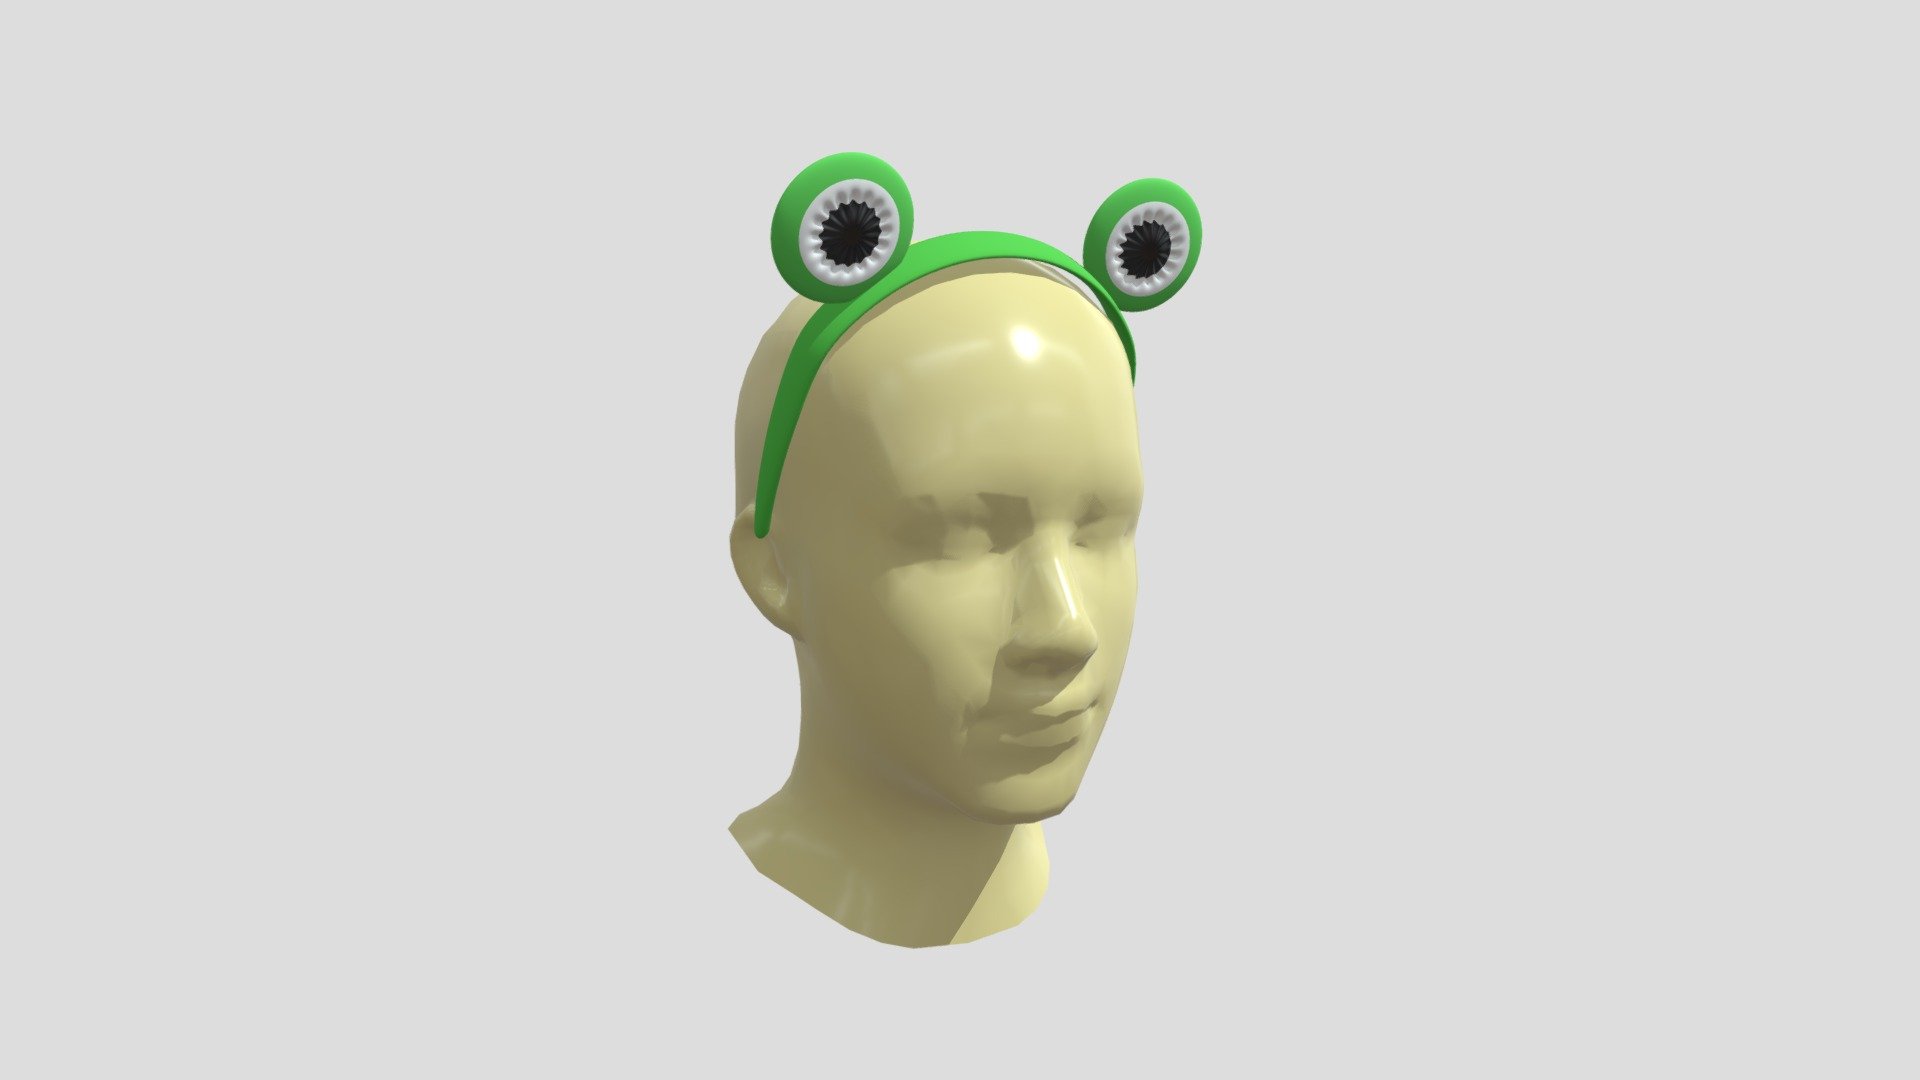 You Can Use This Model as long as you credit me for the original creation!

www.iayseozdemir.com

sheayseozdemir@gmail.com - Frog Eyes Headband - Download Free 3D model by iayseozdemir 3d model